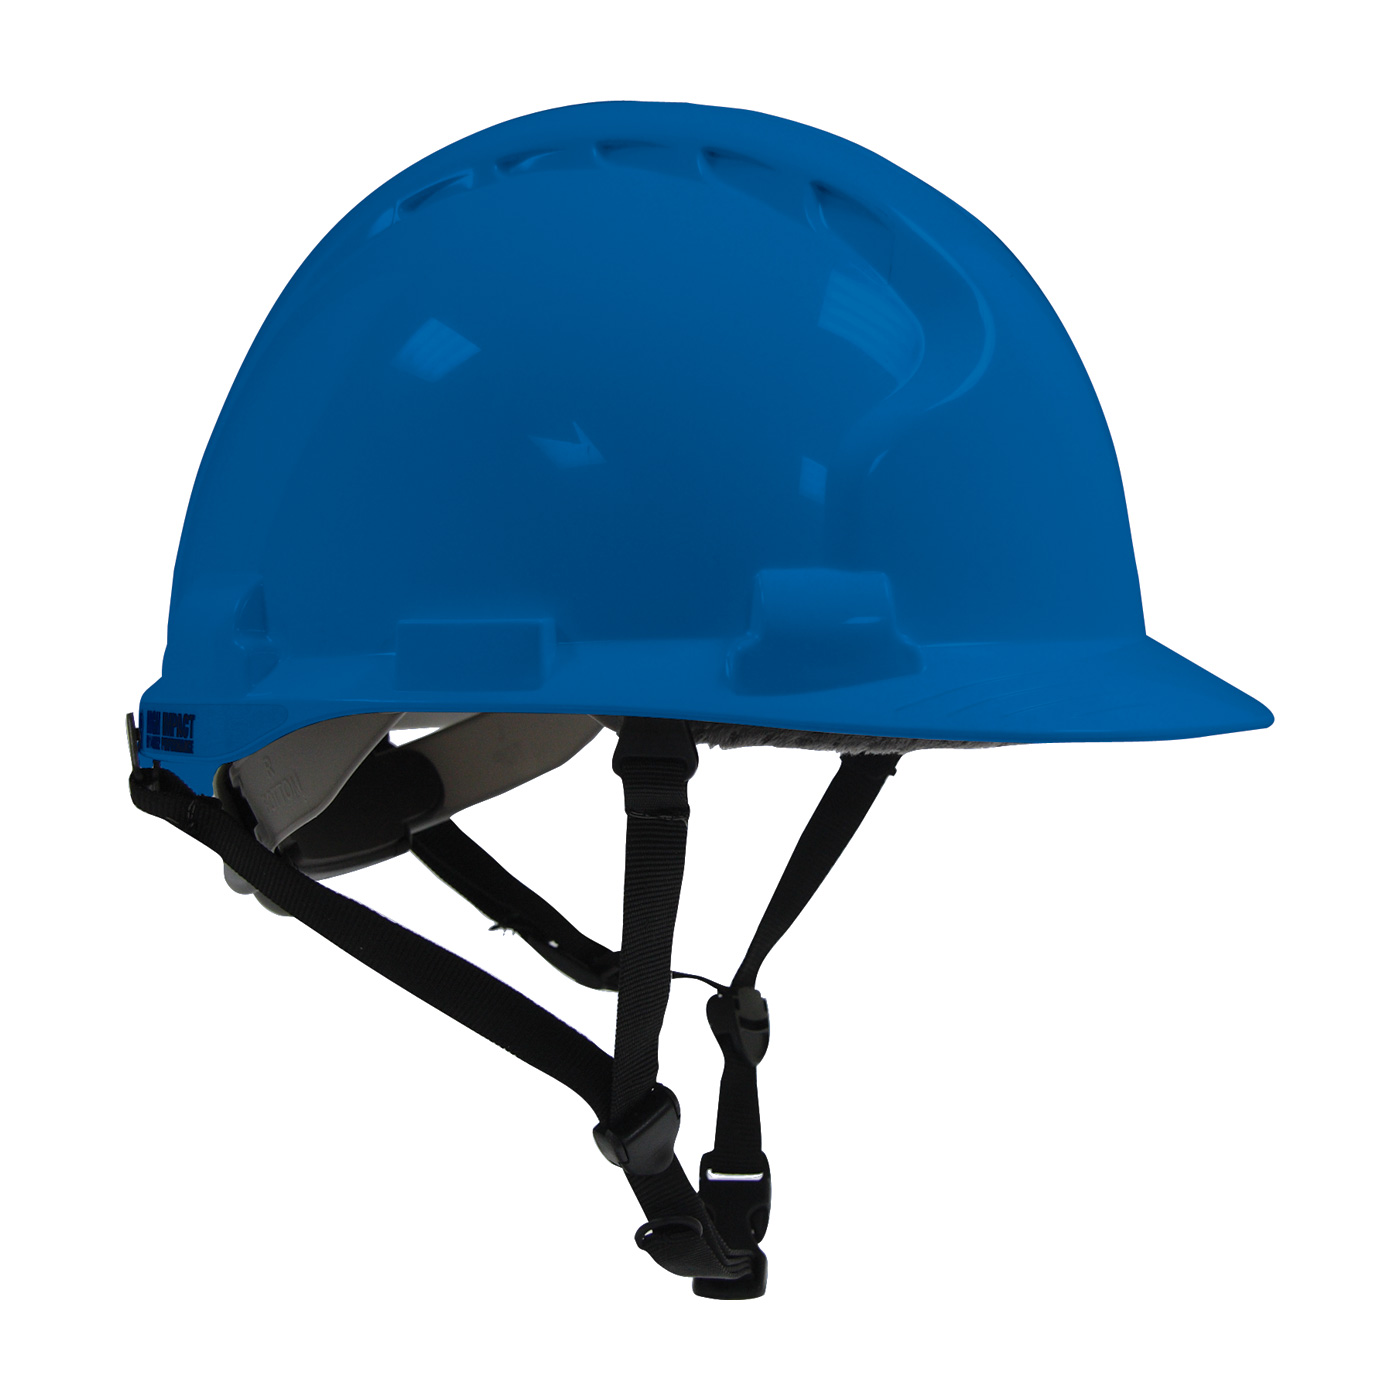 TYPE II LINESMAN HARD HAT WITH HDPE SHELL, EPS IMPACT LINER, POLYESTER SUSPENSION, WHEEL RATCHET ADJUSTMENT AND 4-POINT CHIN STRAP